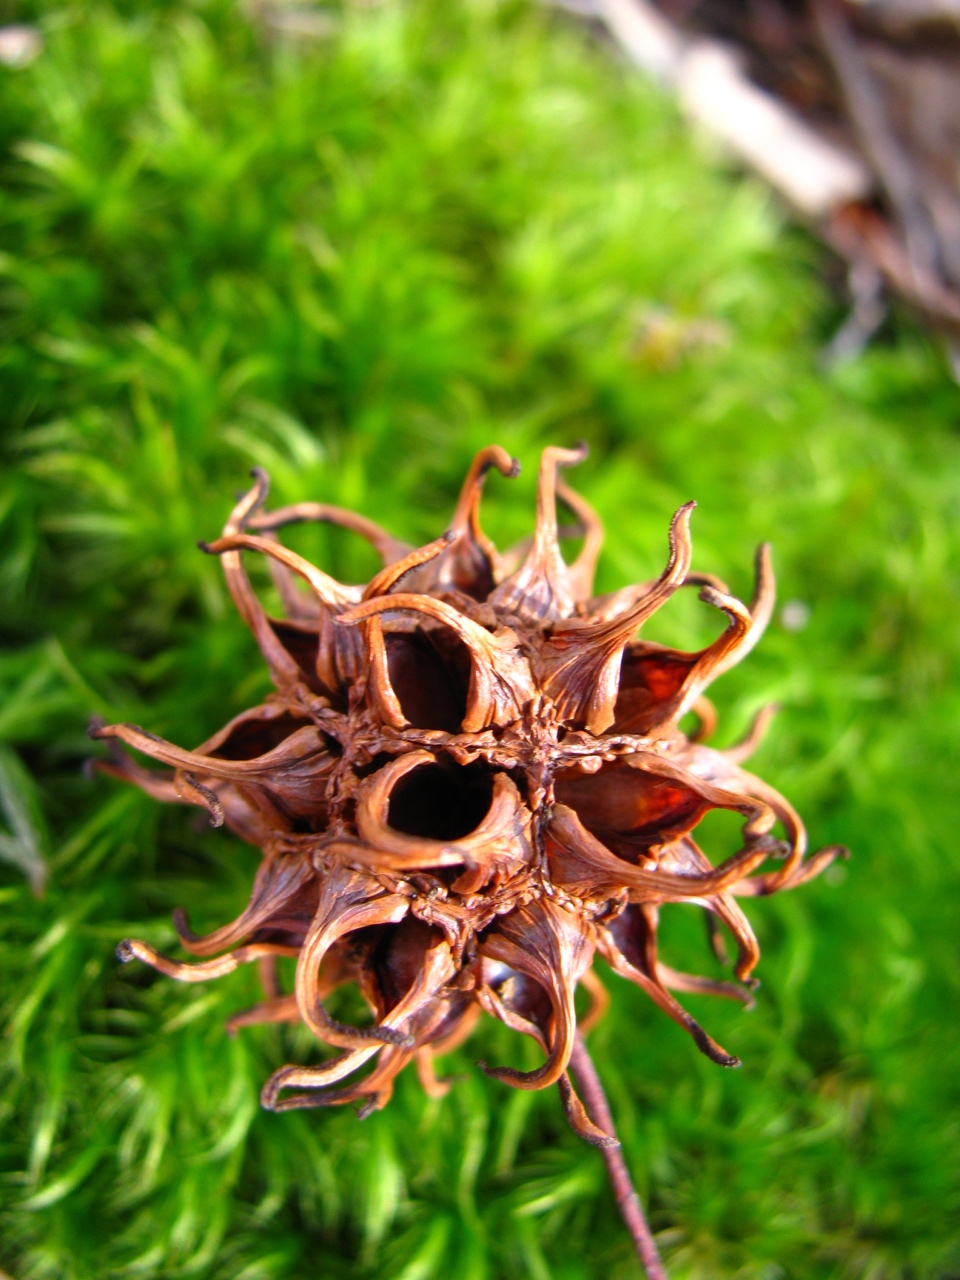 The Scientific Name is Liquidambar styraciflua. You will likely hear them called Sweet Gum, Red Gum, Sweetgum. This picture shows the Close-up of fruit (woody capsule) of Liquidambar styraciflua